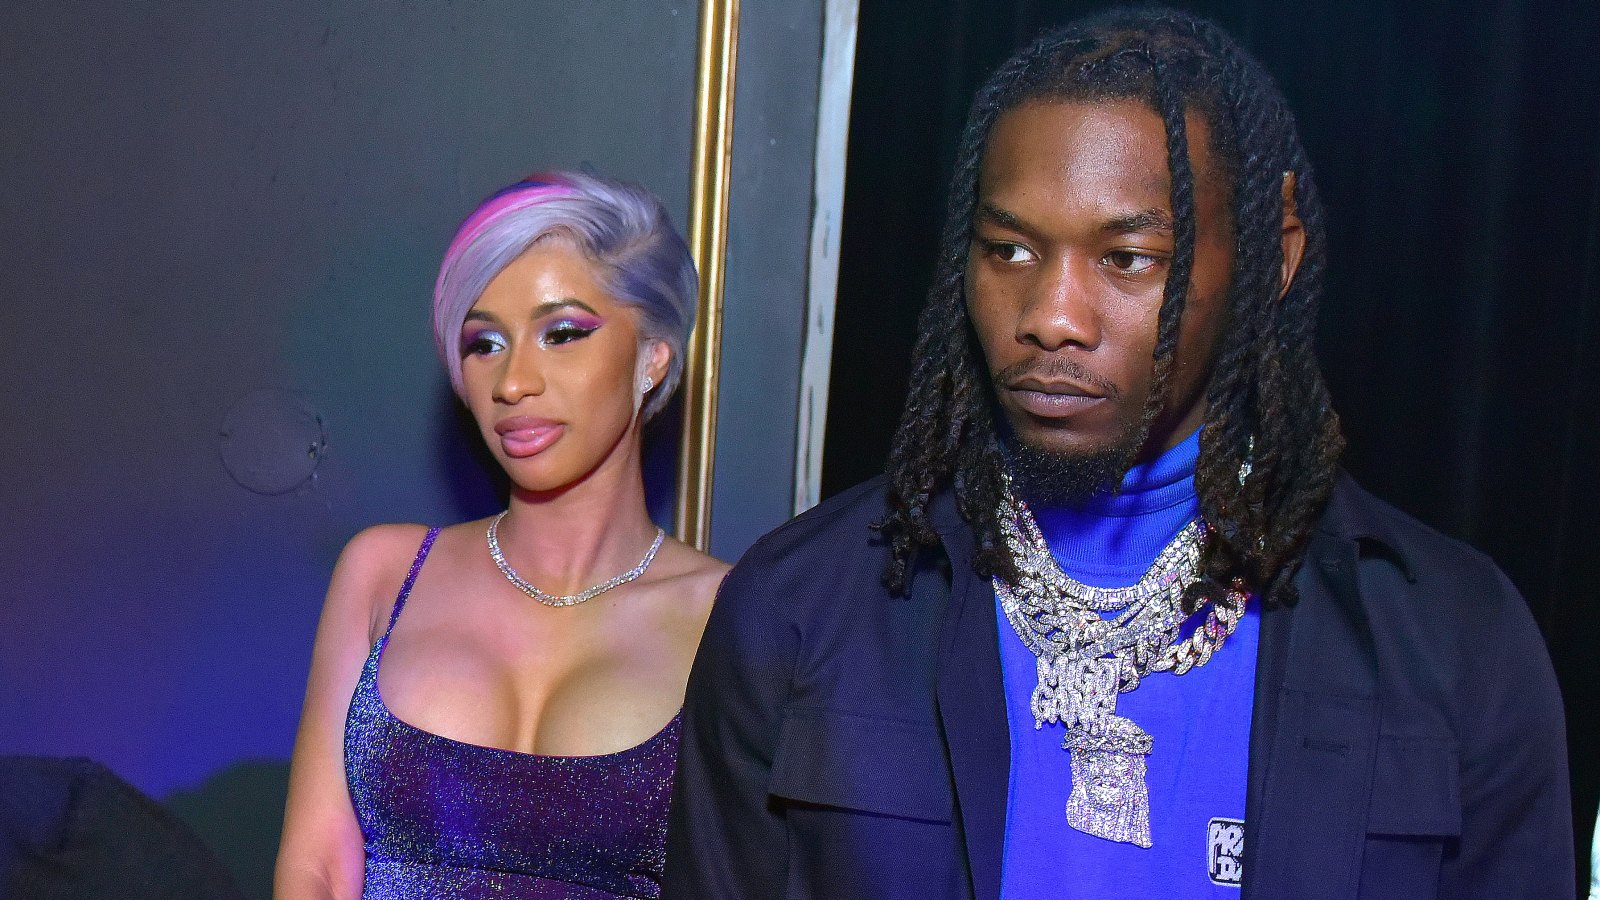 Cardi B Hints There's Hope for Her Relationship With Estranged Husband Offset